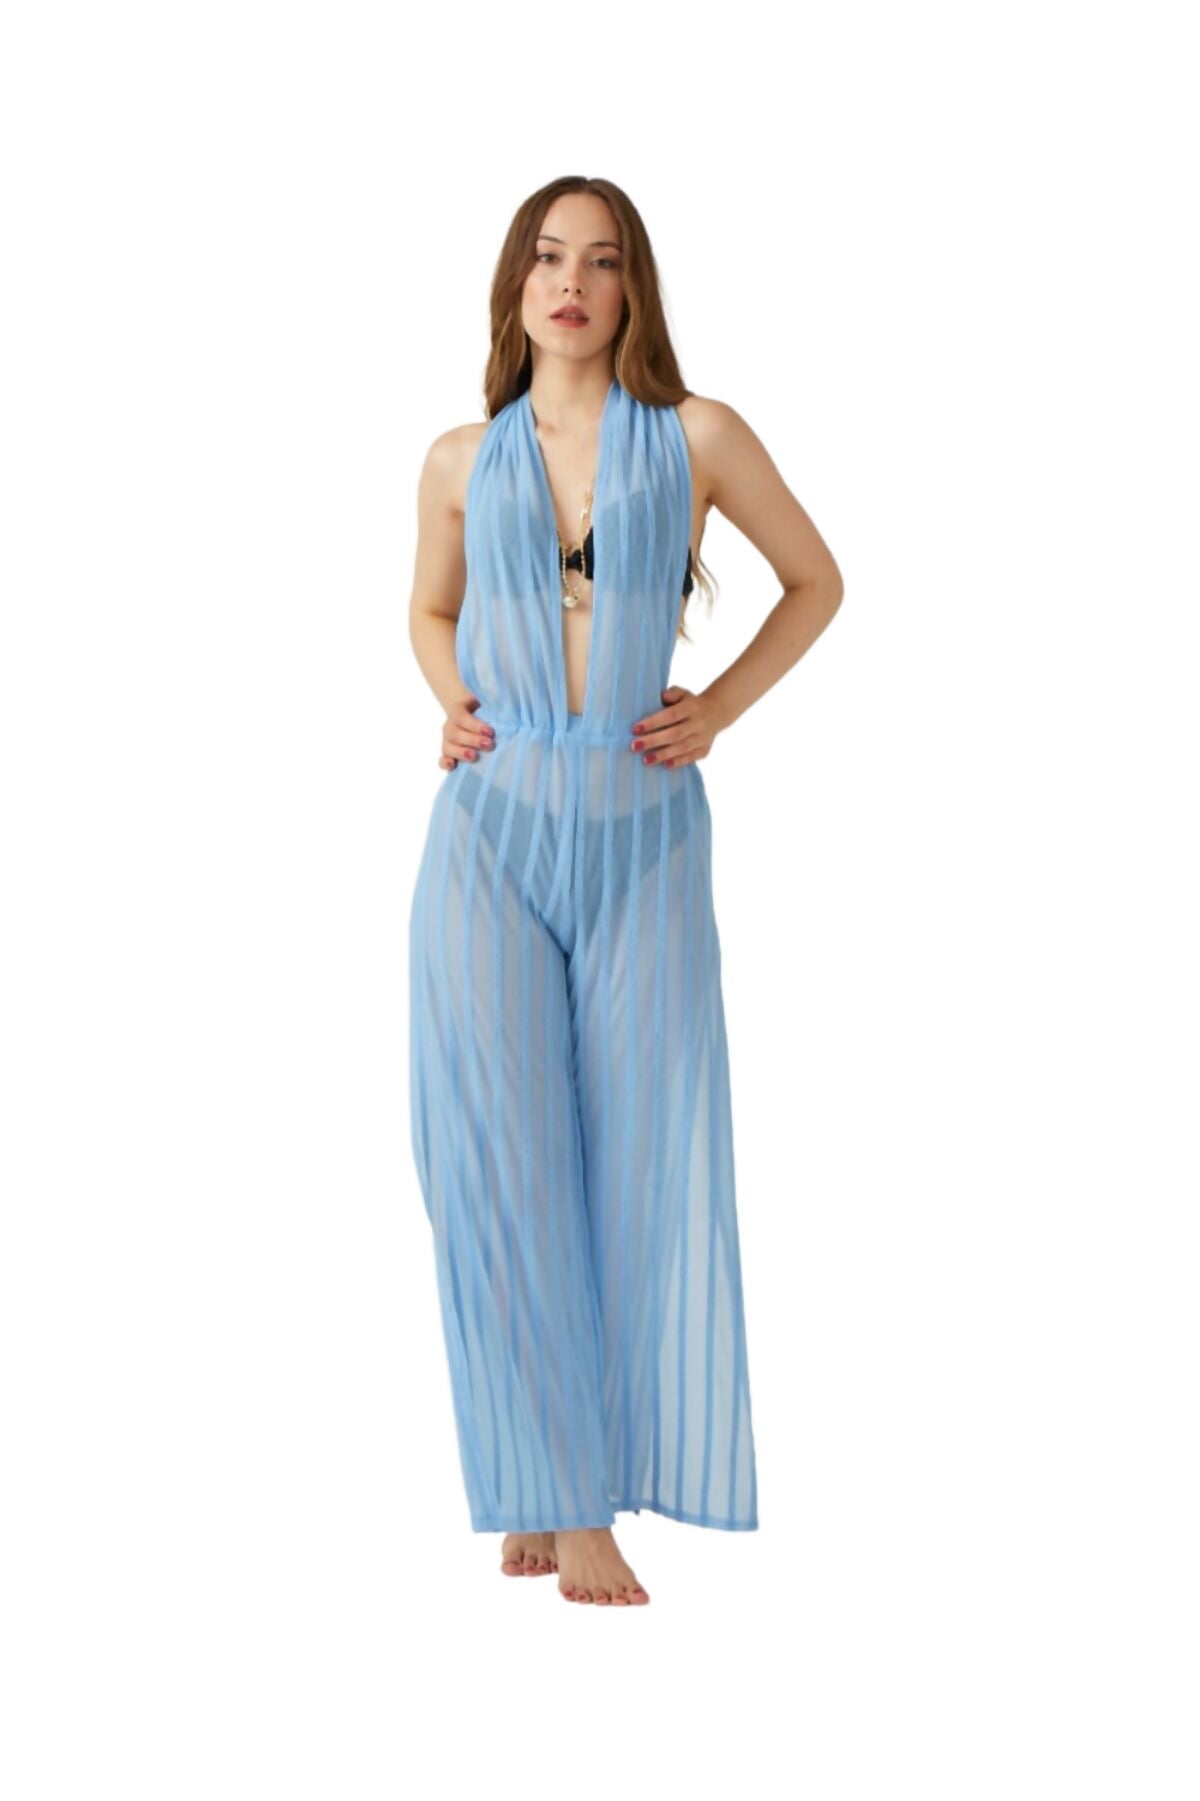 Colorful Women's Cover-Up Wide-Leg Pants Suit - Jump Suit Great for Cruise, Lake, Beach and Poolside